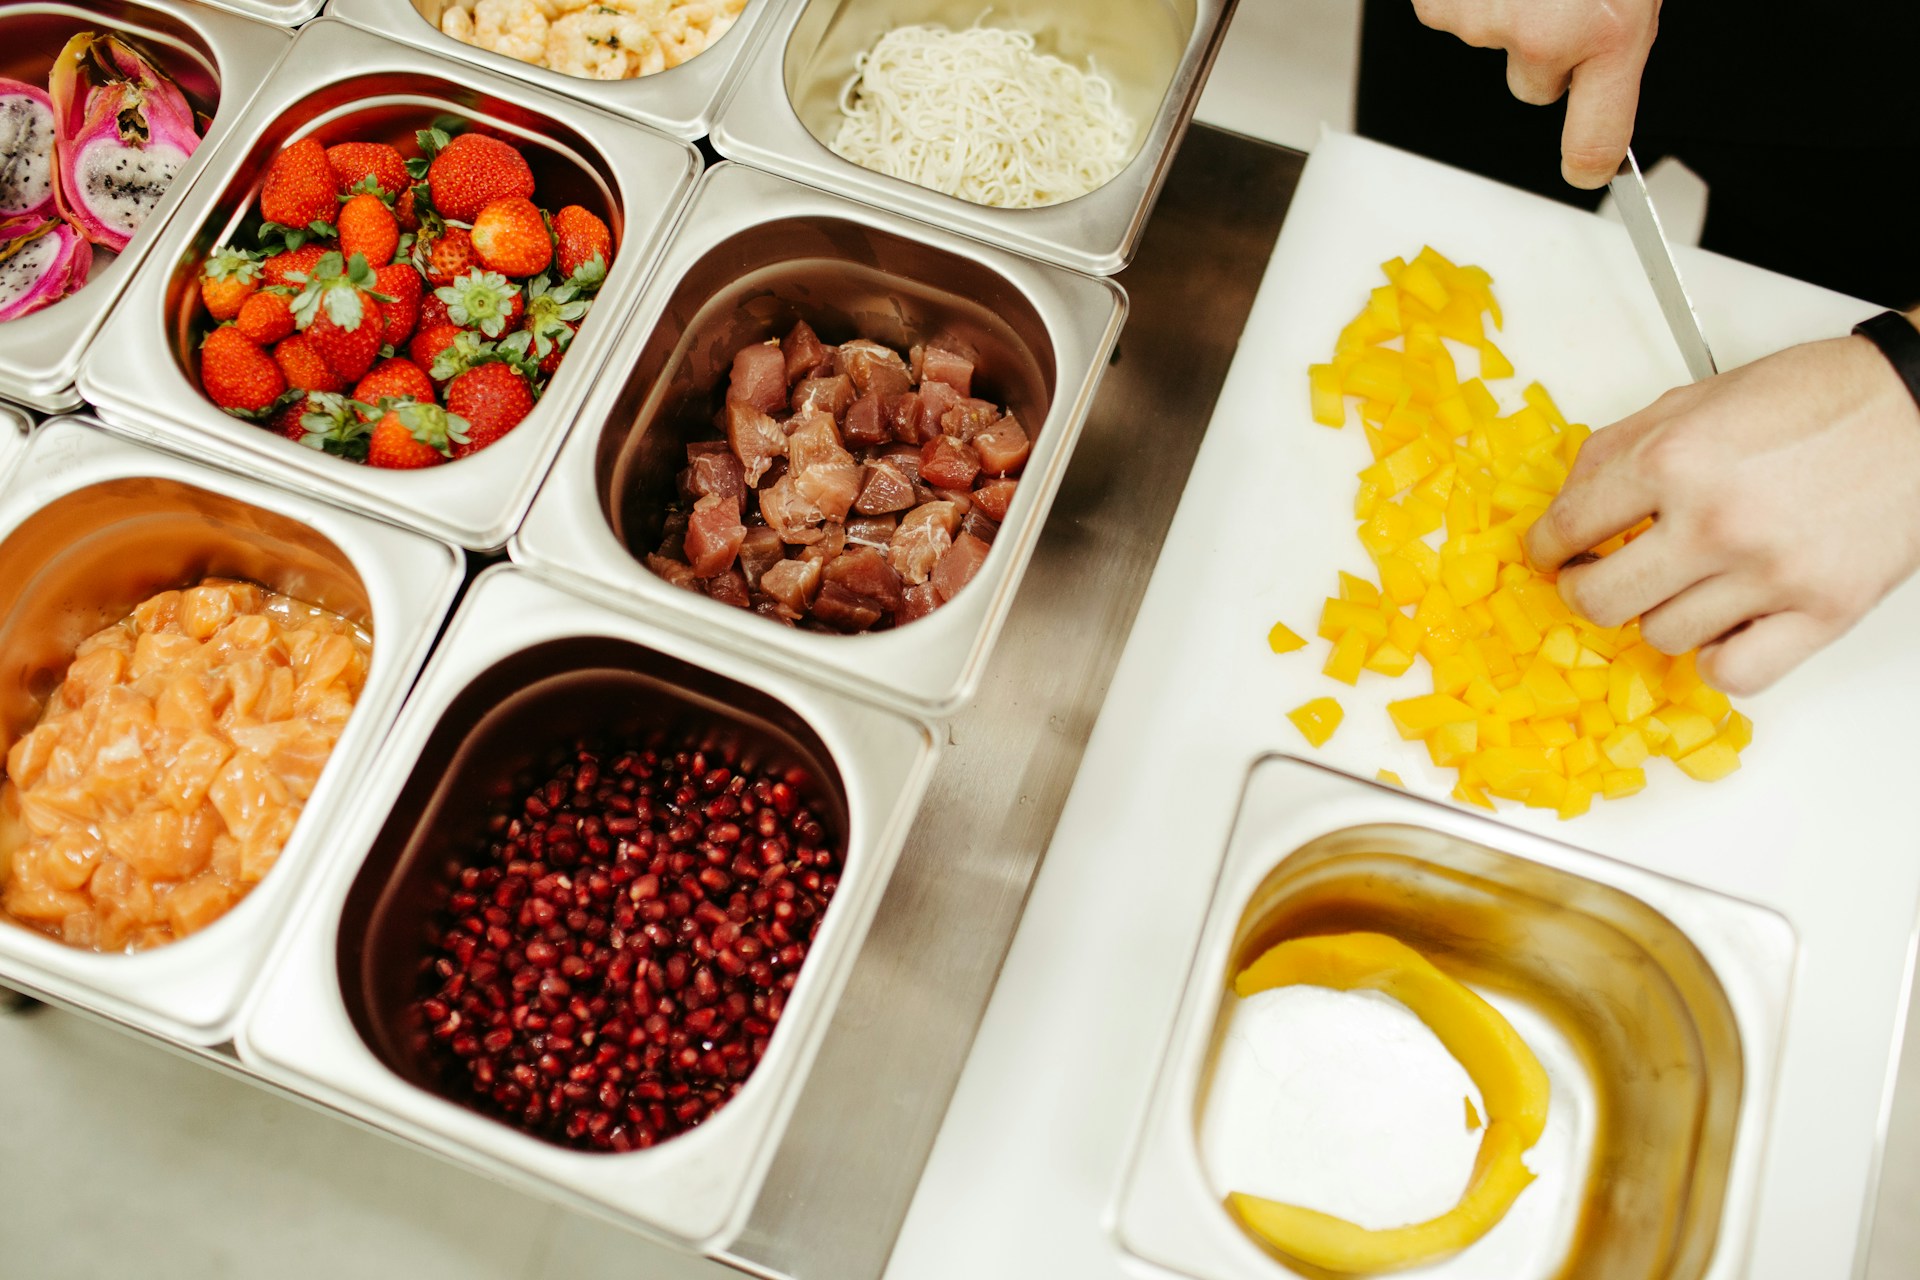 How to Setup Your Restaurant with a Fresh New Salad Bar - salad wrap up - Eleven36 Blog